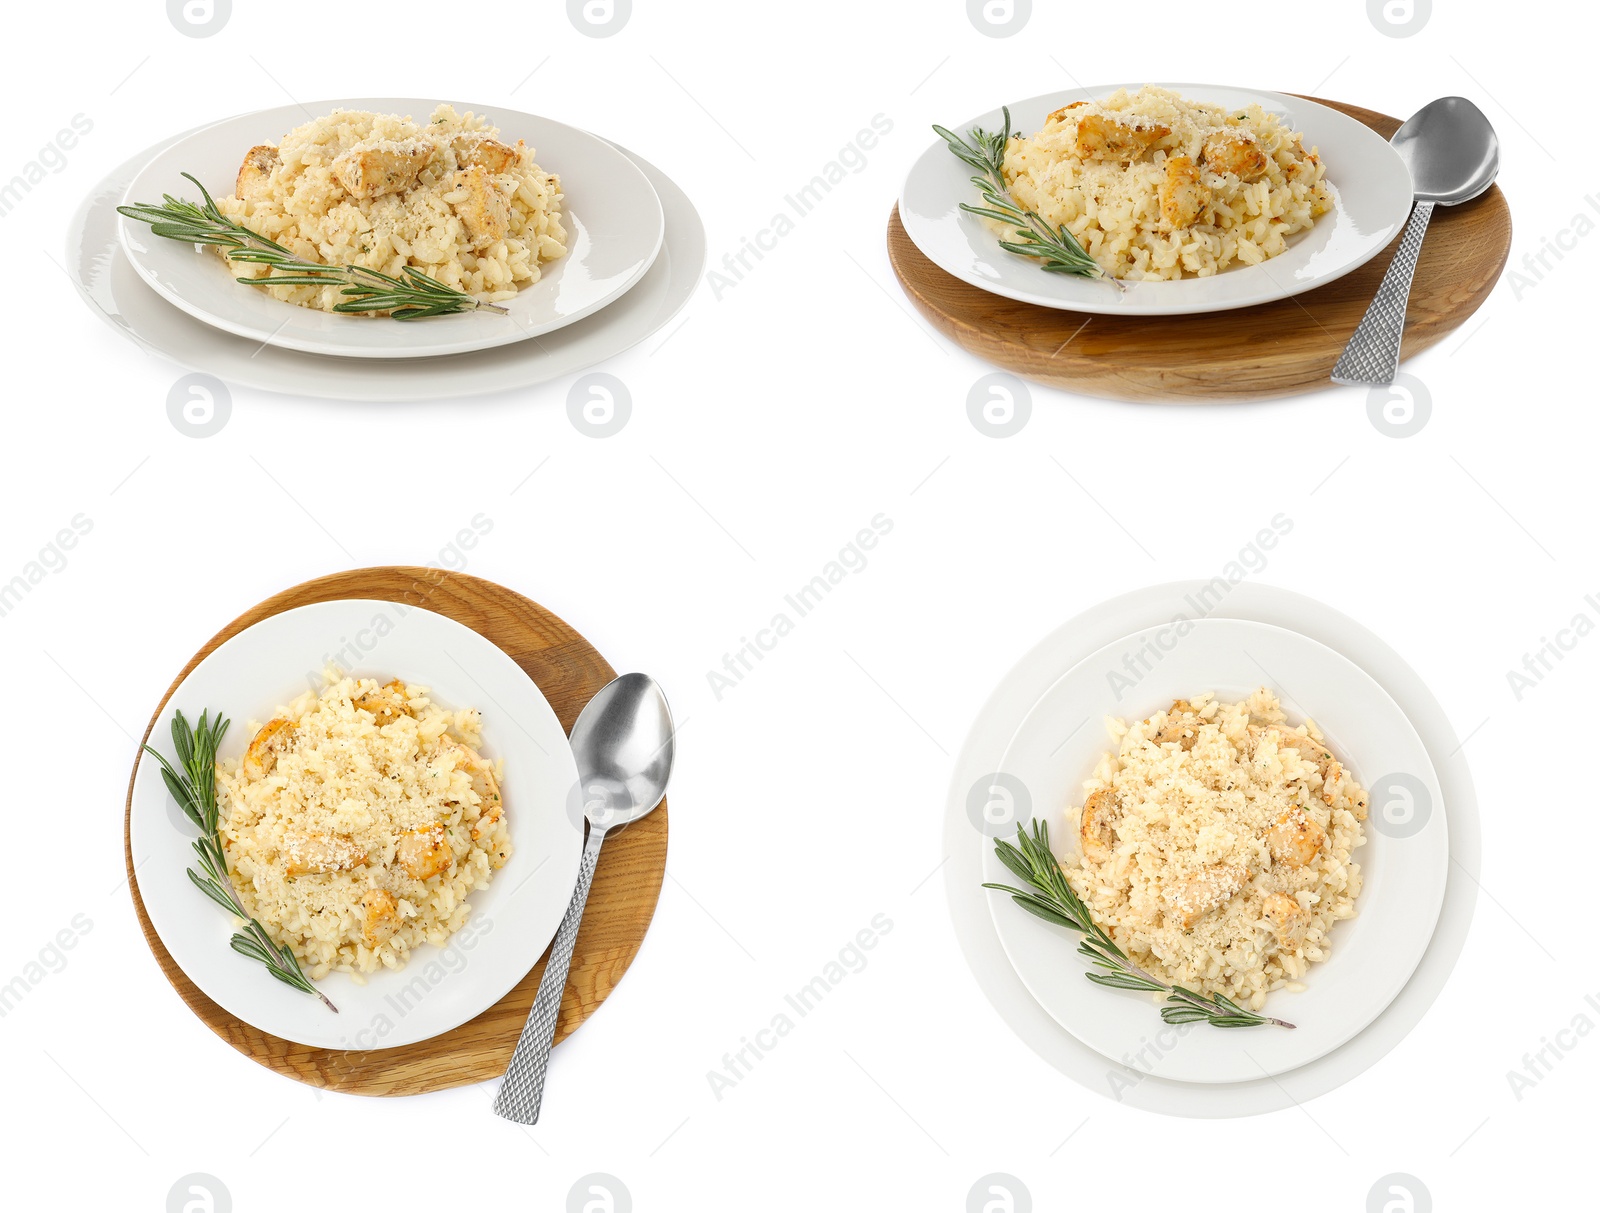 Image of Collage with delicious rissotos on white background